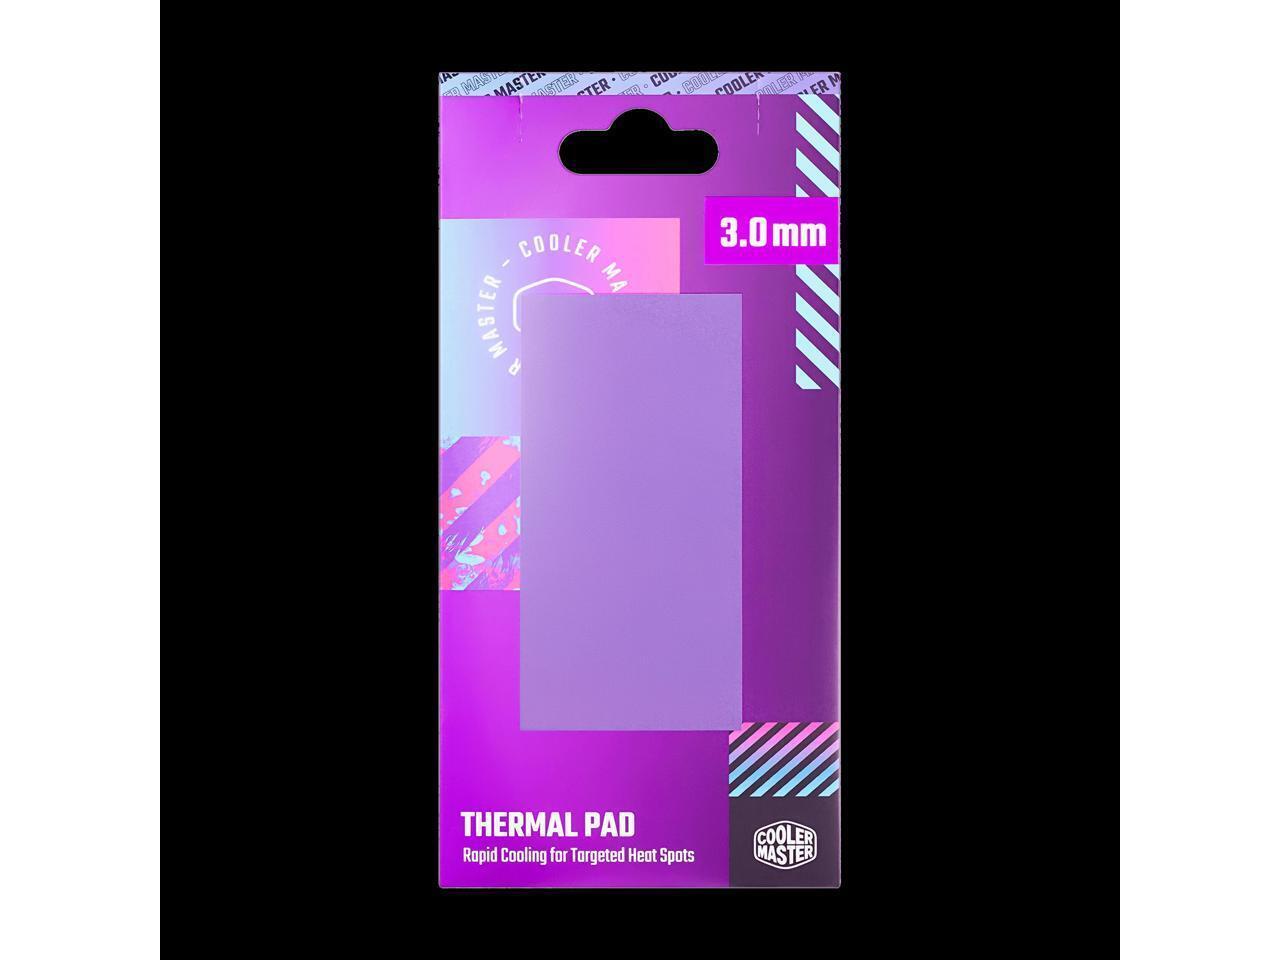 Cooler Master Thermal Pad (3.0mm Thickness) - 13.3w/mK, 95 x 45 mm, High Thermal